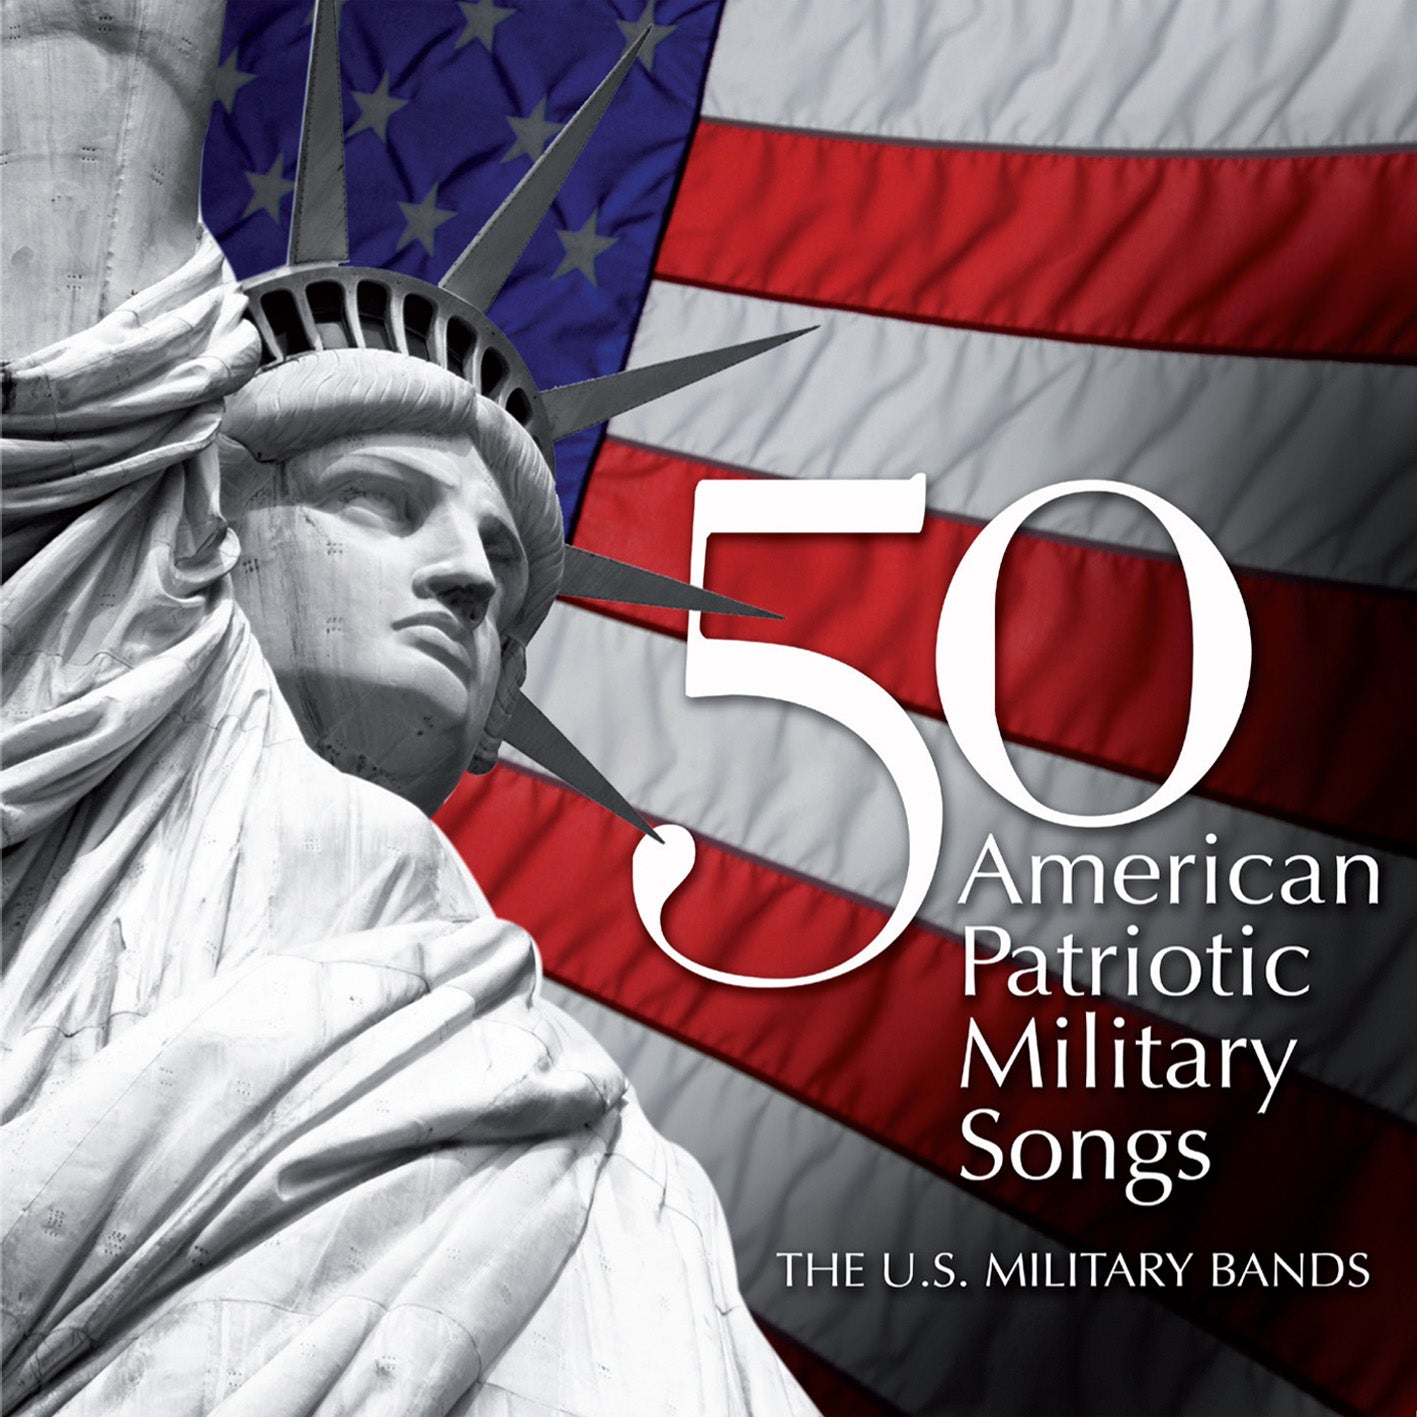 50 American Patriotic Military Songs / The U. S. Military Bands